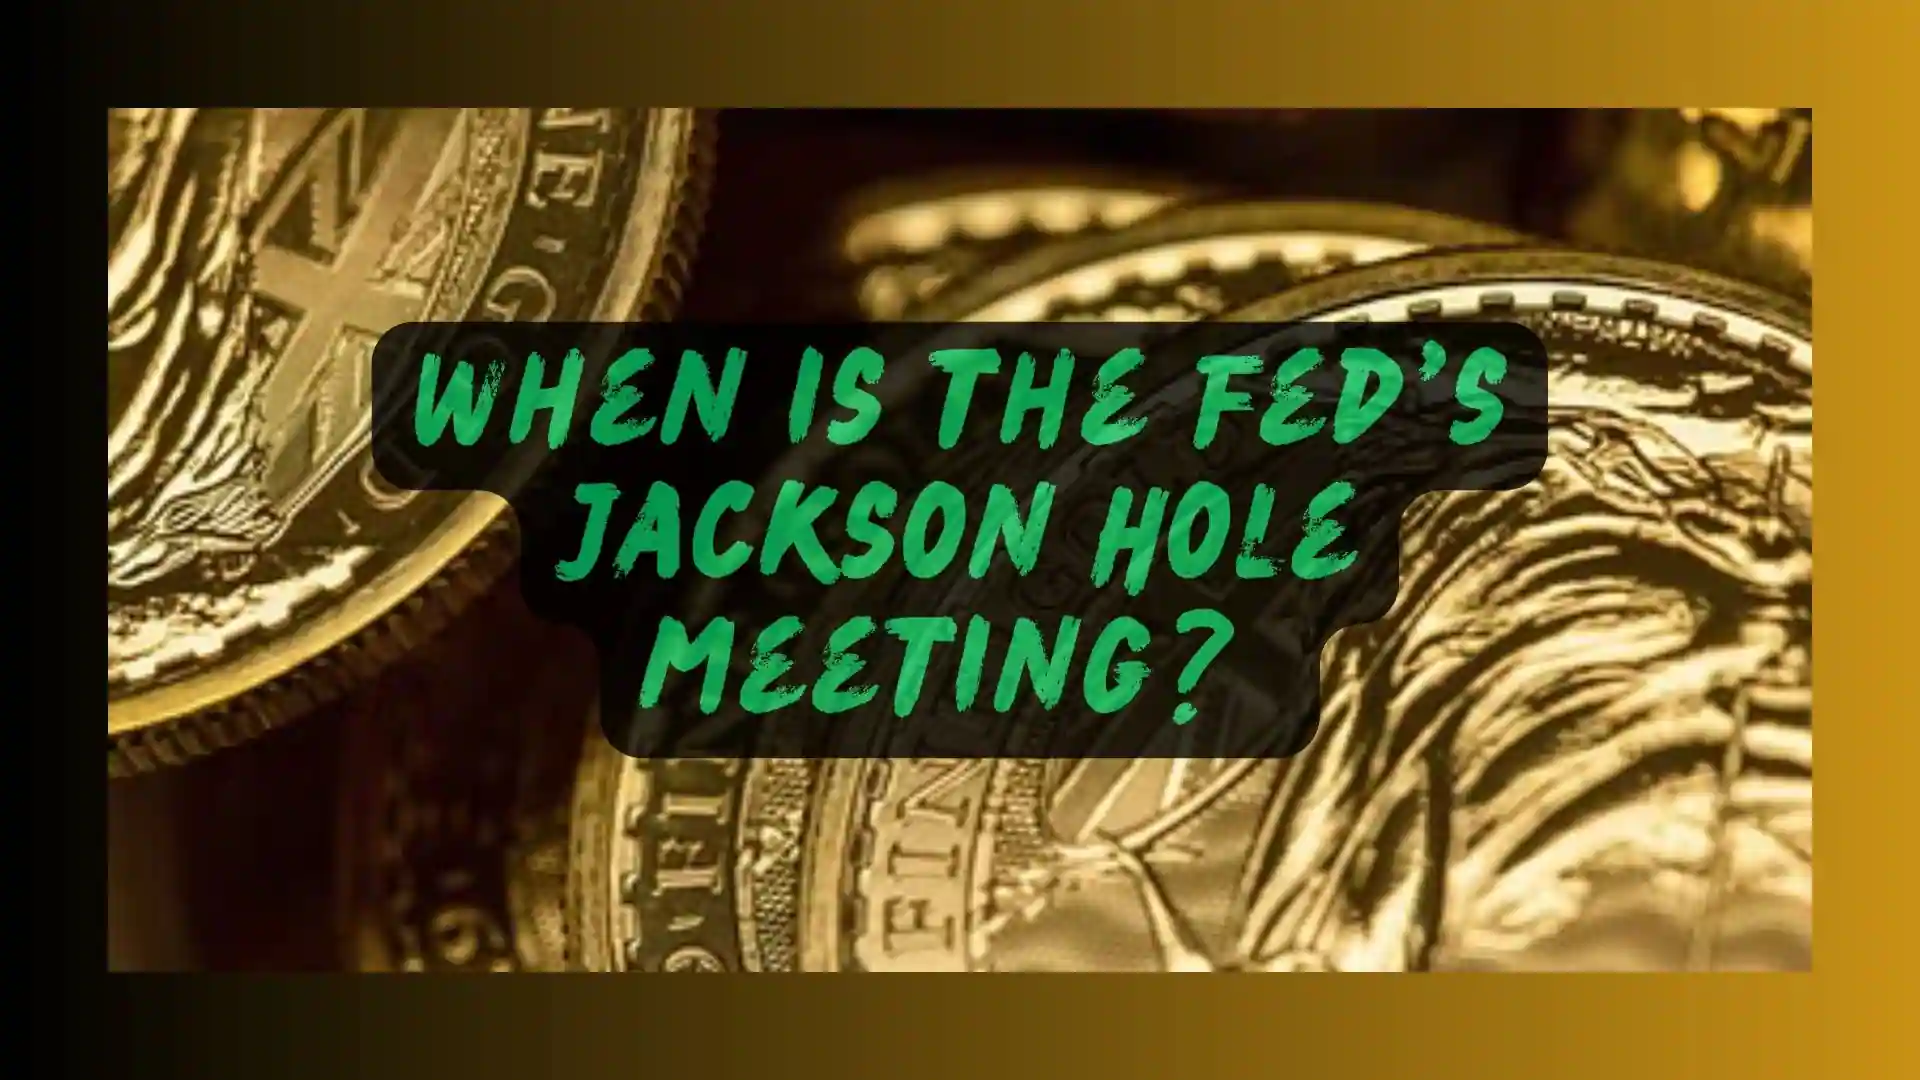 When is the Fed's Jackson Hole Meeting?